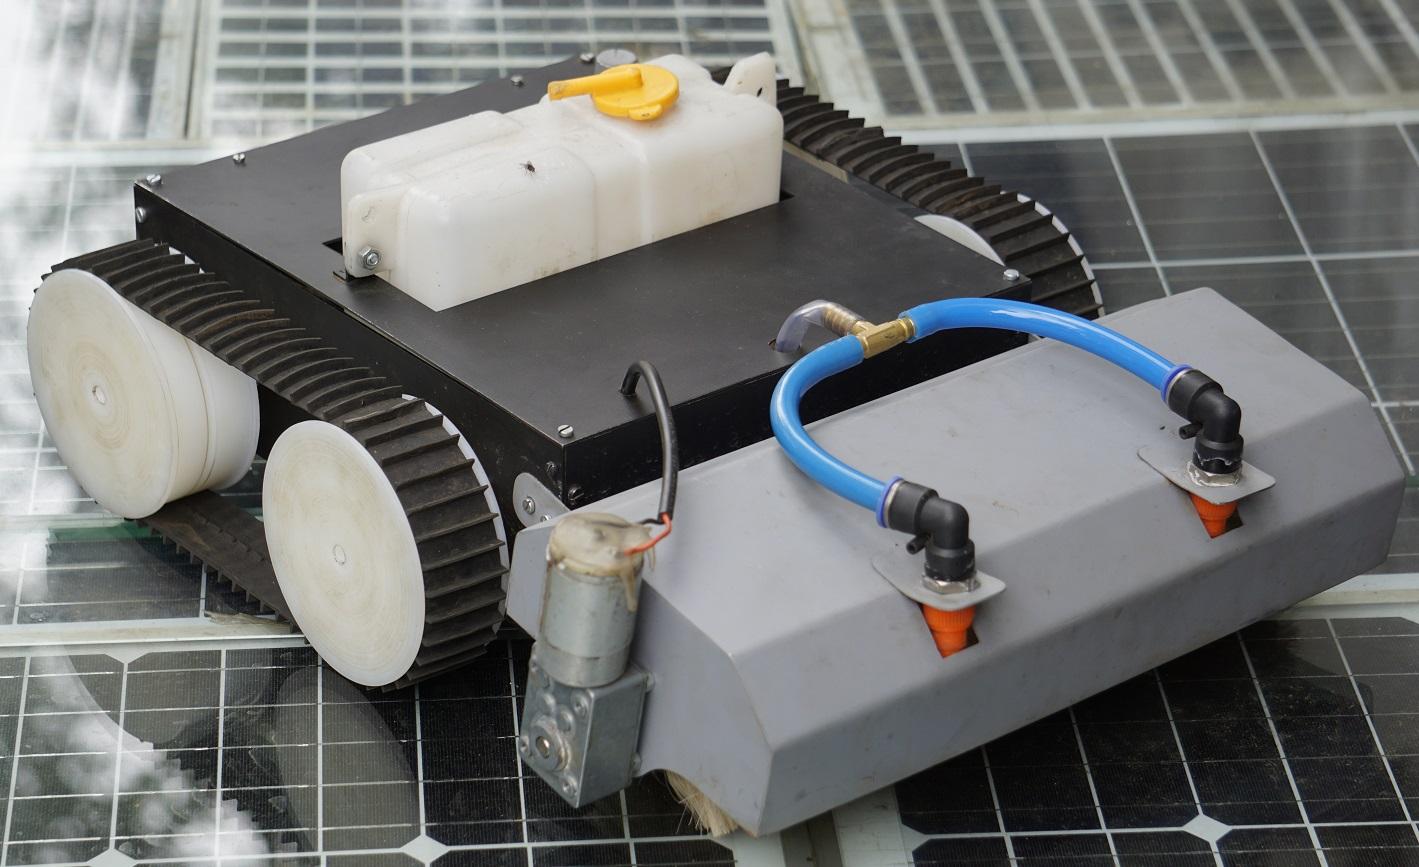 solar panel cleaning robot project - What is the aim of solar panel cleaning robot